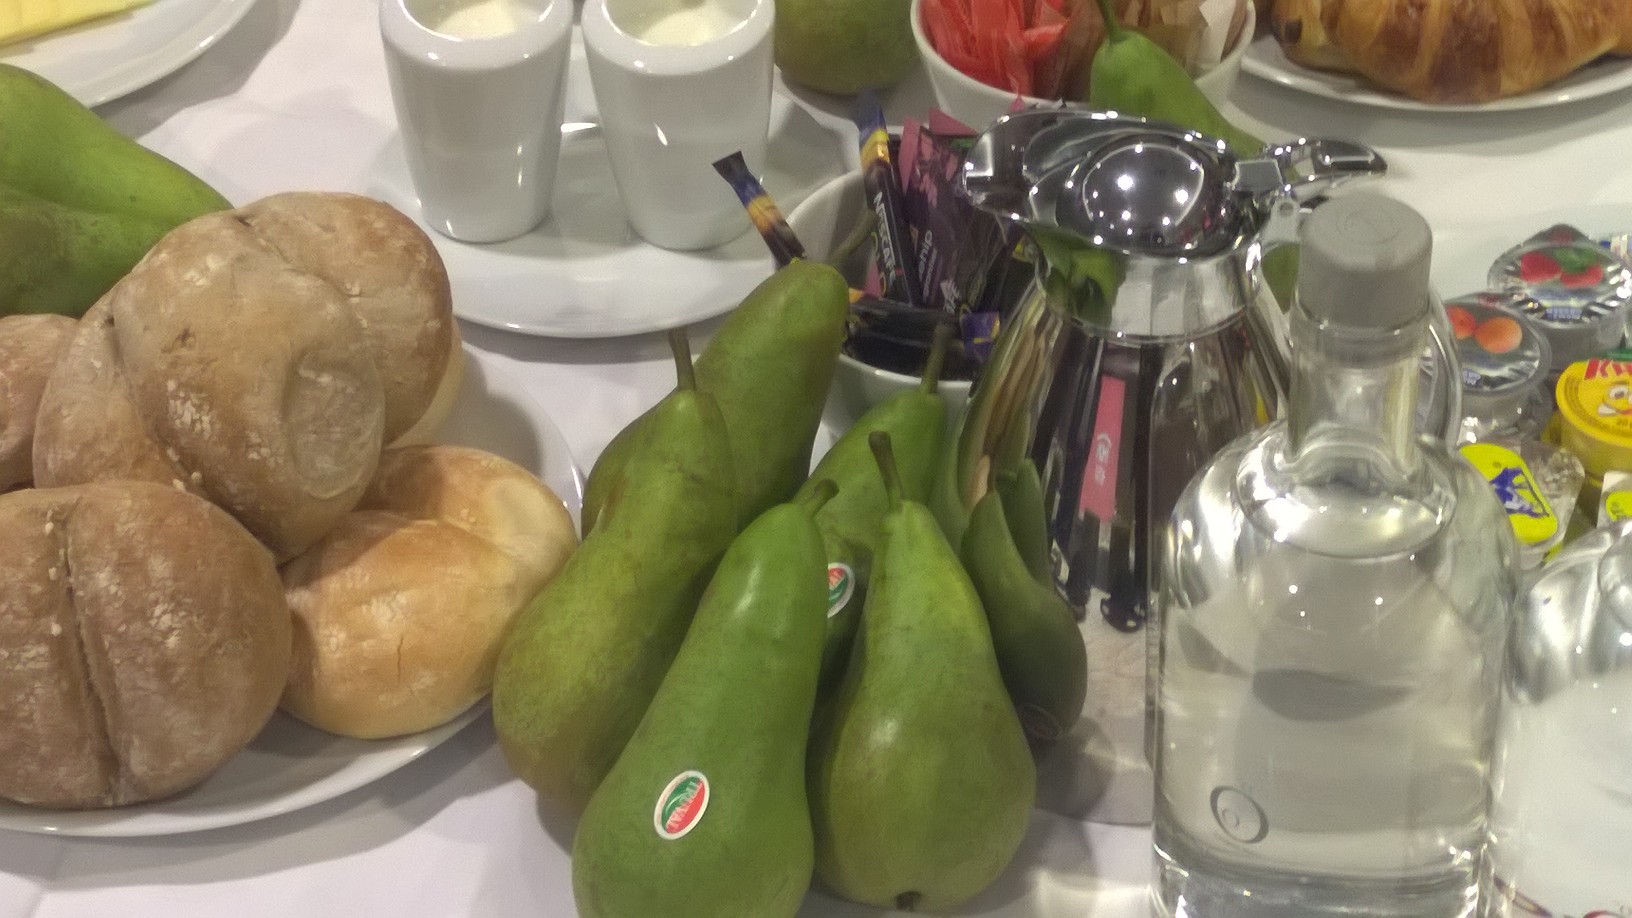 Earlier this month an extensive delegation from Brazil, led by Minister of Agriculture Blairo Maggi, visited Belgium. Among items on the agenda for the visit was market access for Belgian pears.